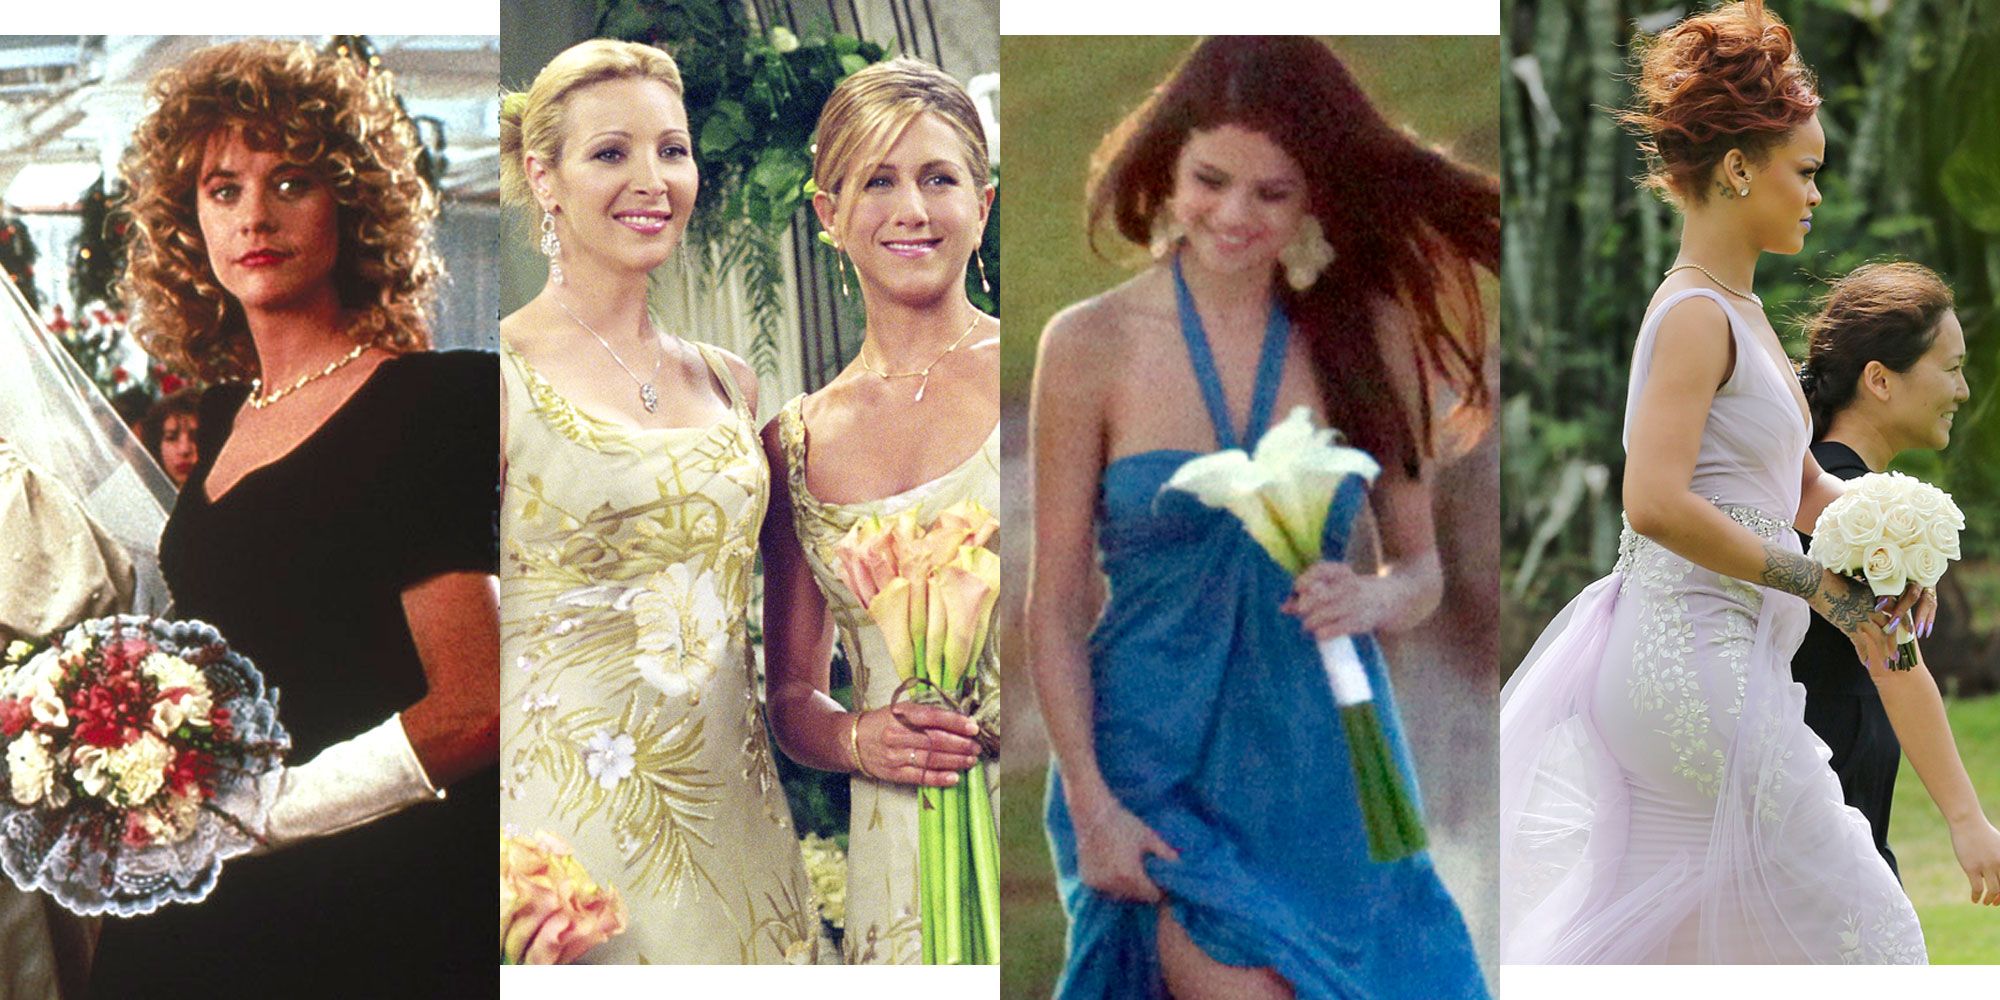 The Bridesmaid's Dress Everyone Wore the Year You Were Born - Bridesmaid  Gowns Through the Years